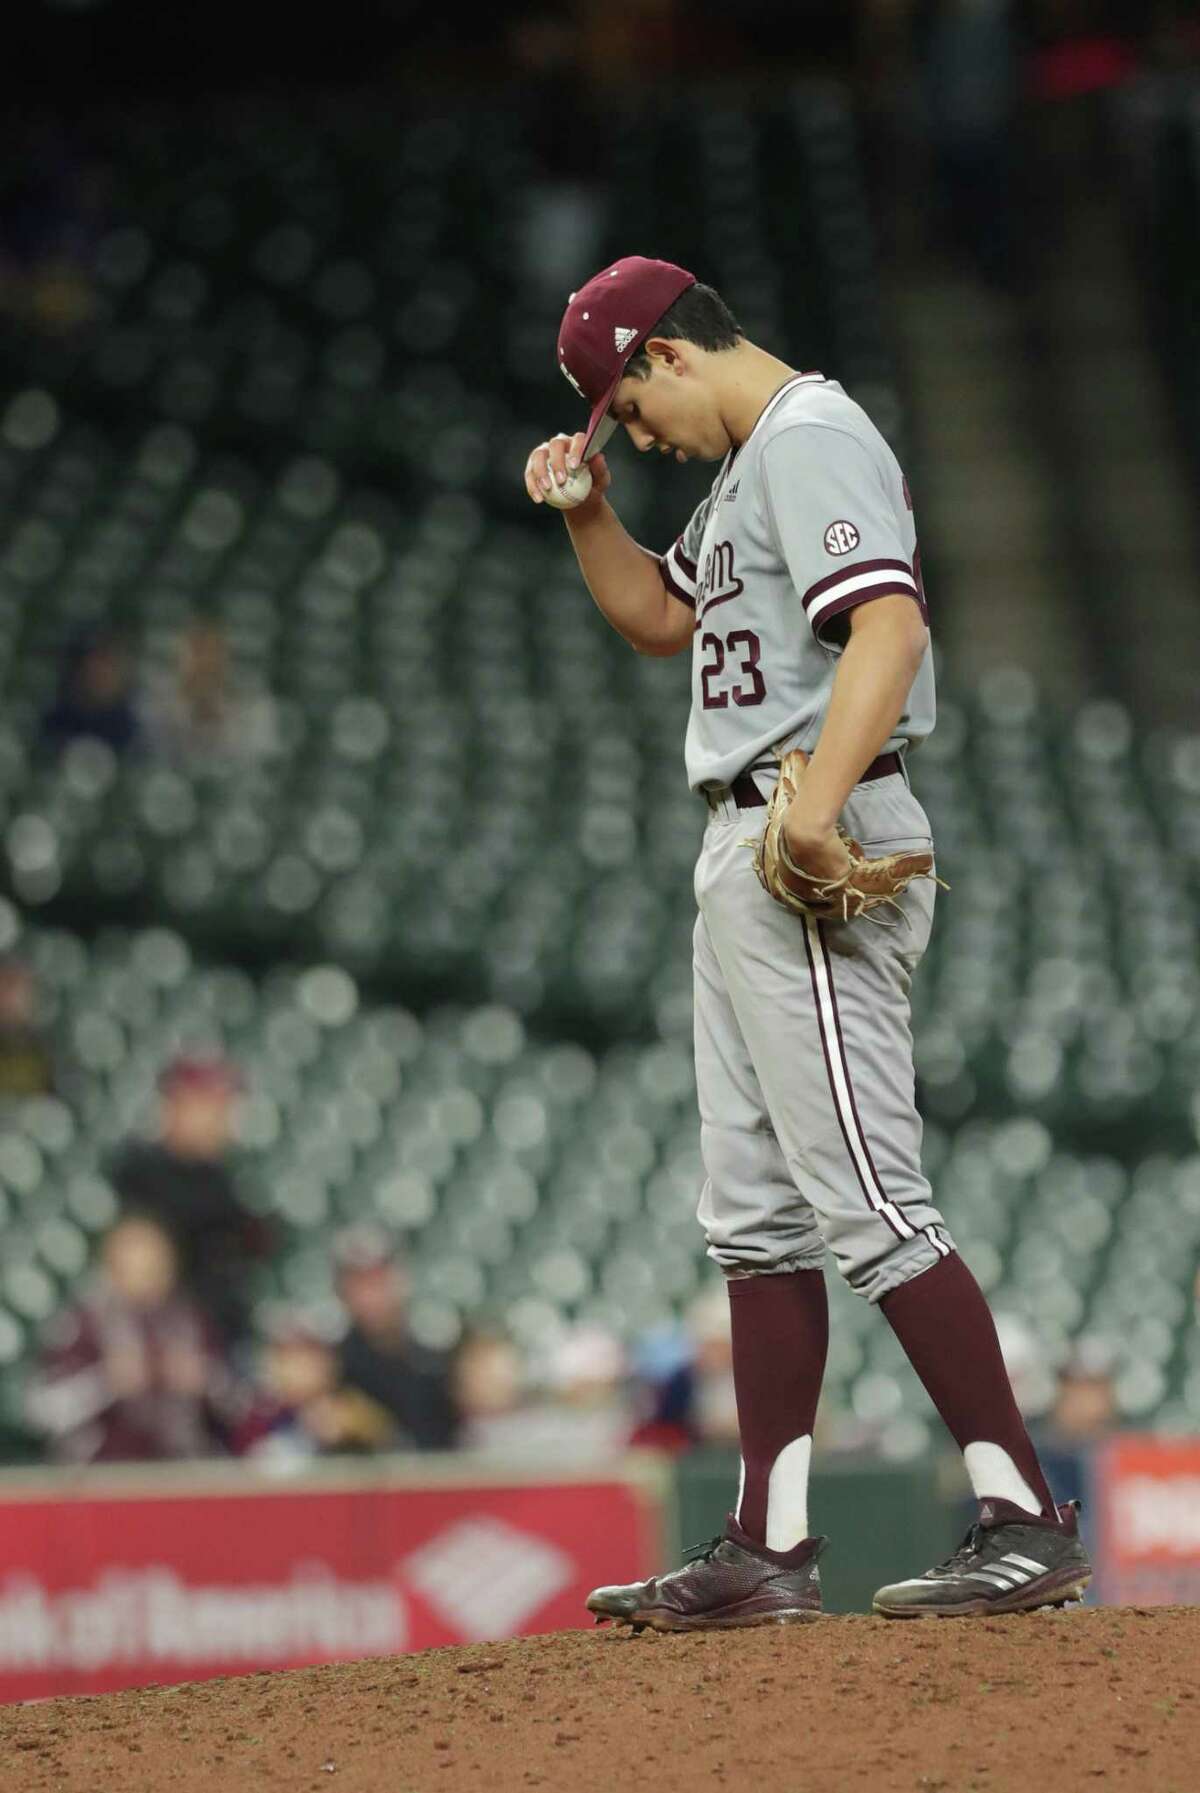 Texas Aggie Christian Roa (23) warms up during the ninth inning of a game in the 2019 Shriners College Classic at Minute Maid Park, Sunday, March 3, 2019, in Houston.